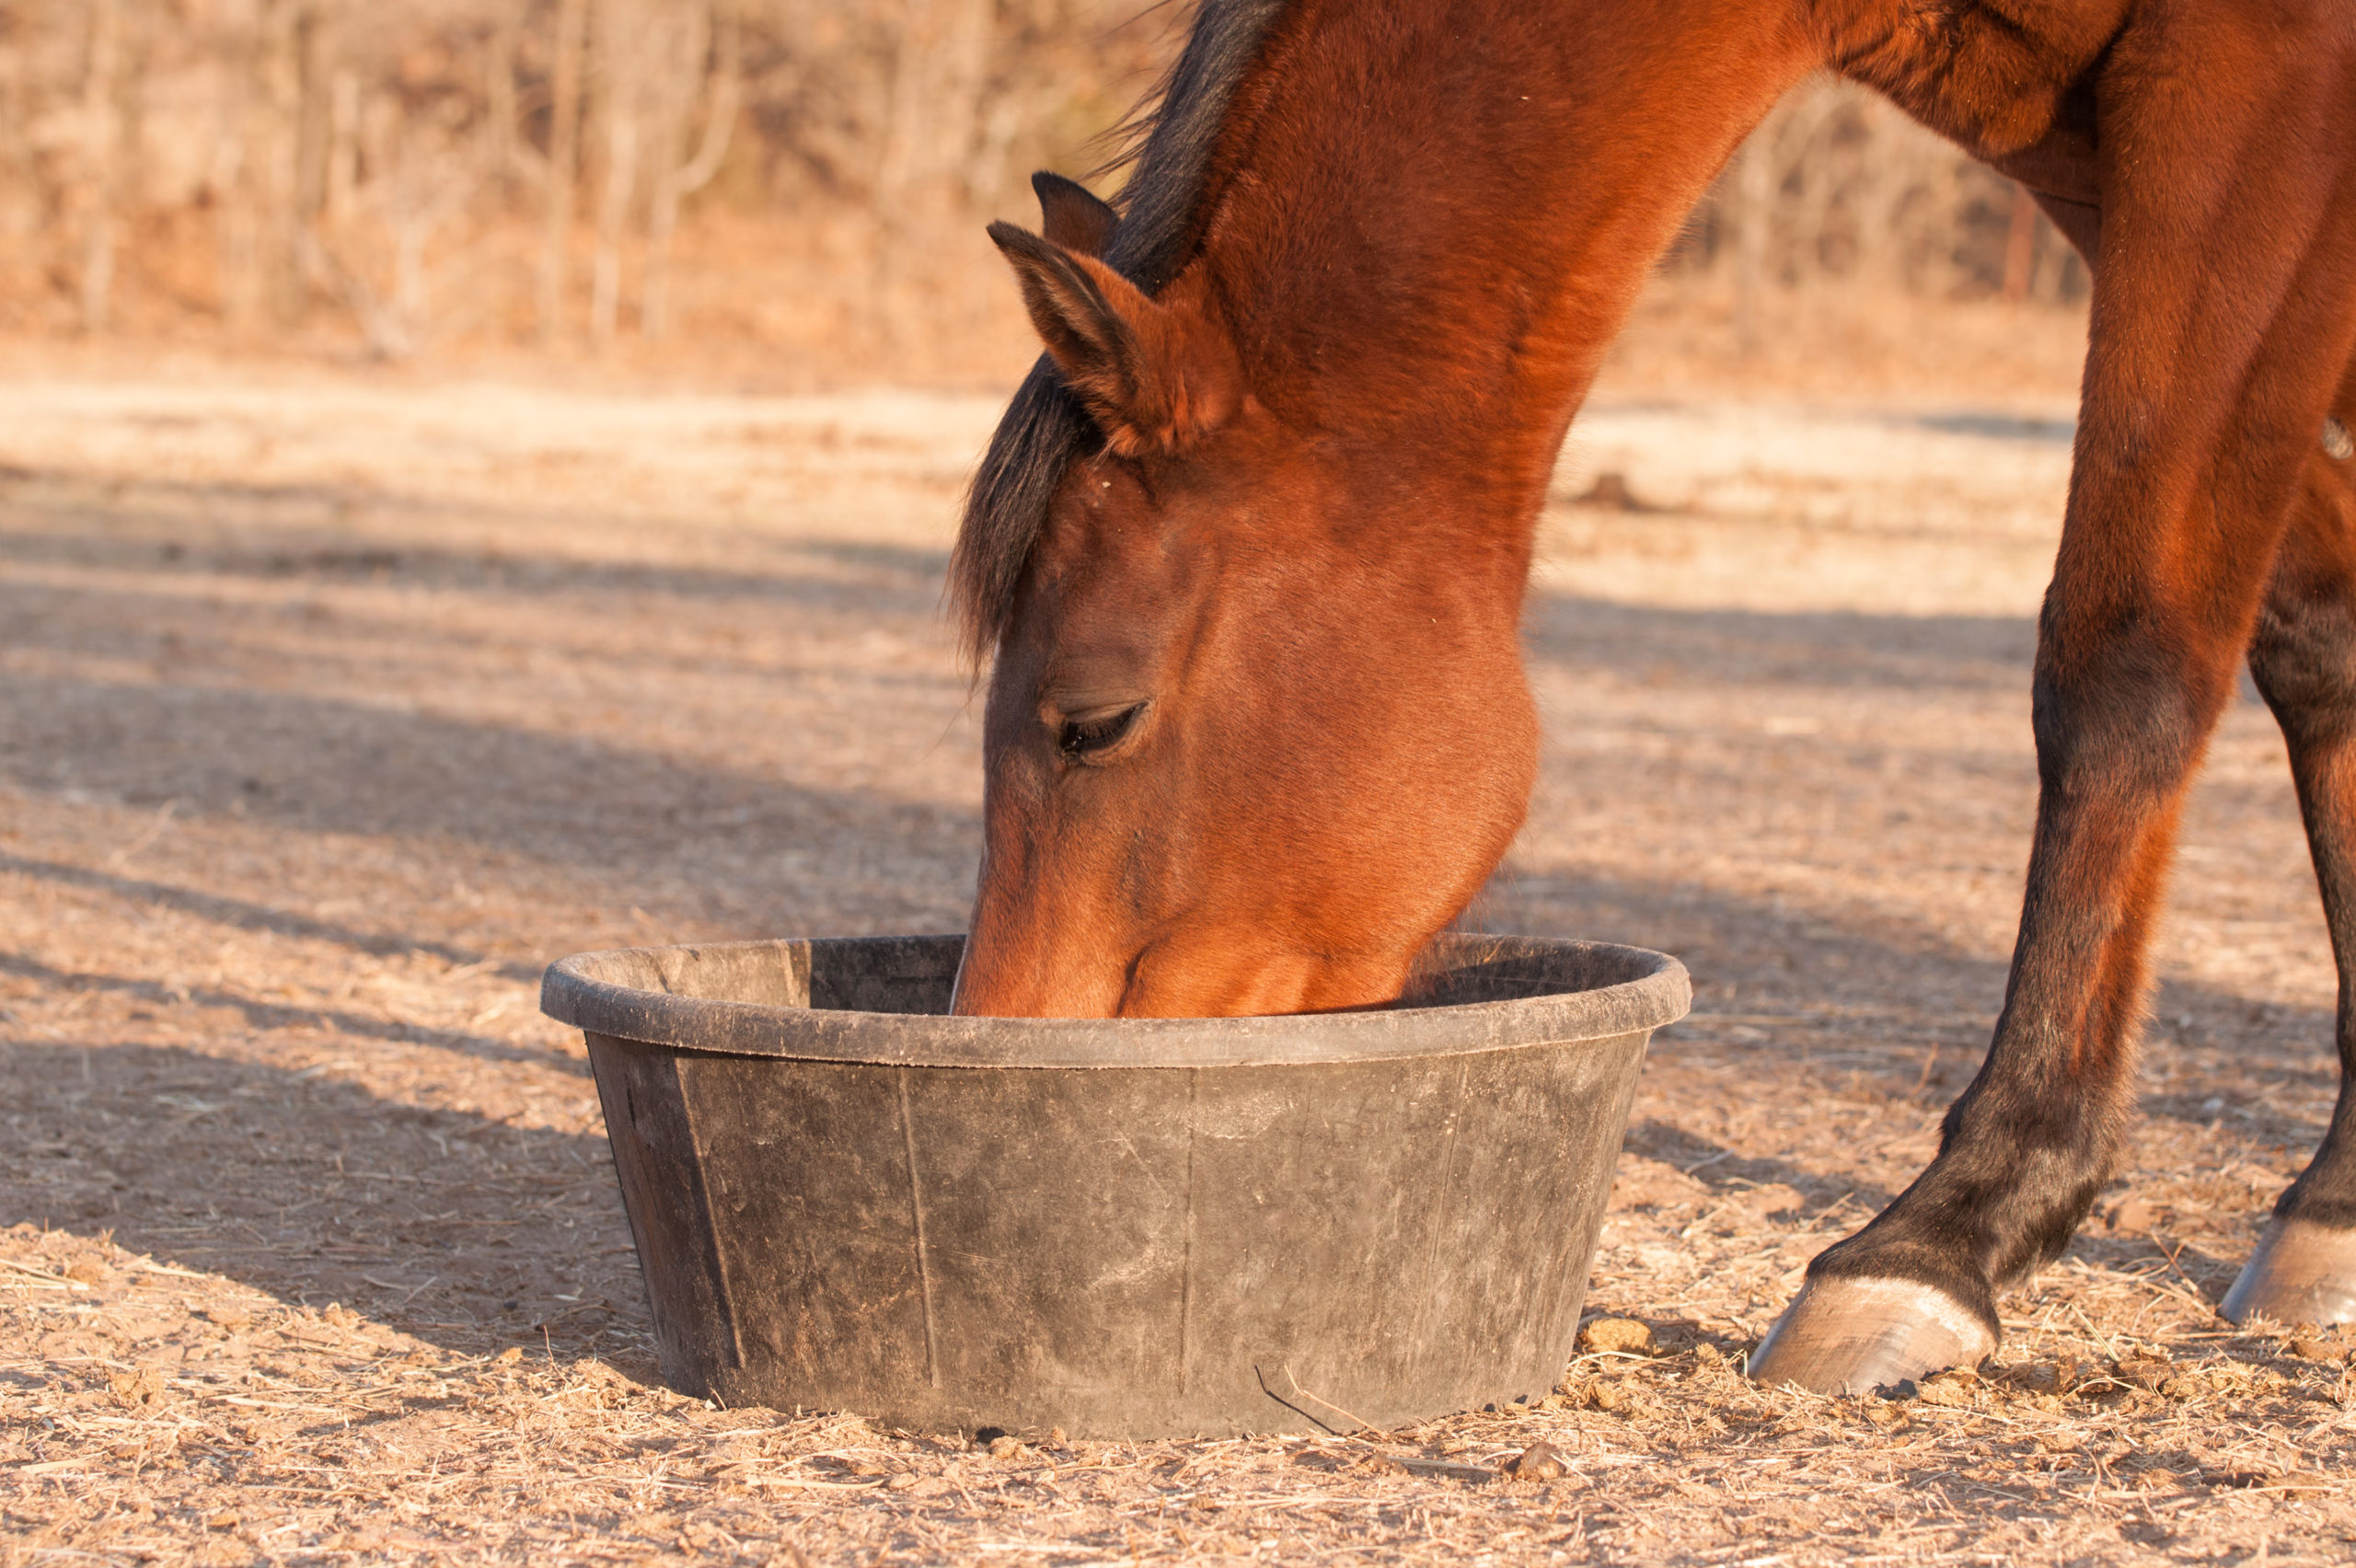 How To Properly Care For And Rehabilitate Rescued Horses